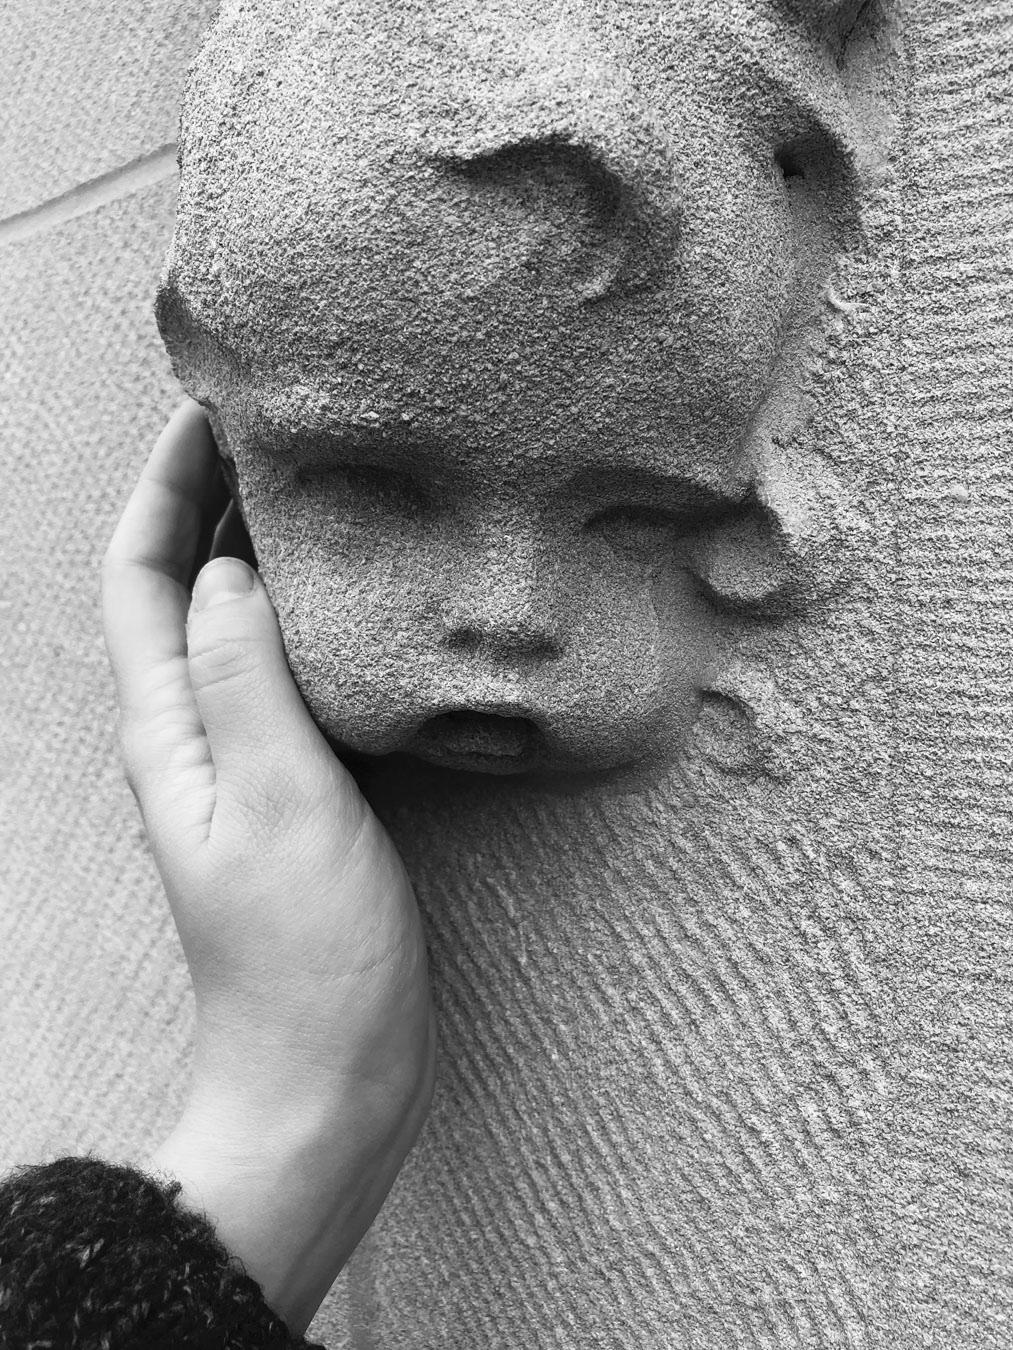 A black and white photograph of a white person's hand reaching out to touch a cherubic face made of stone.